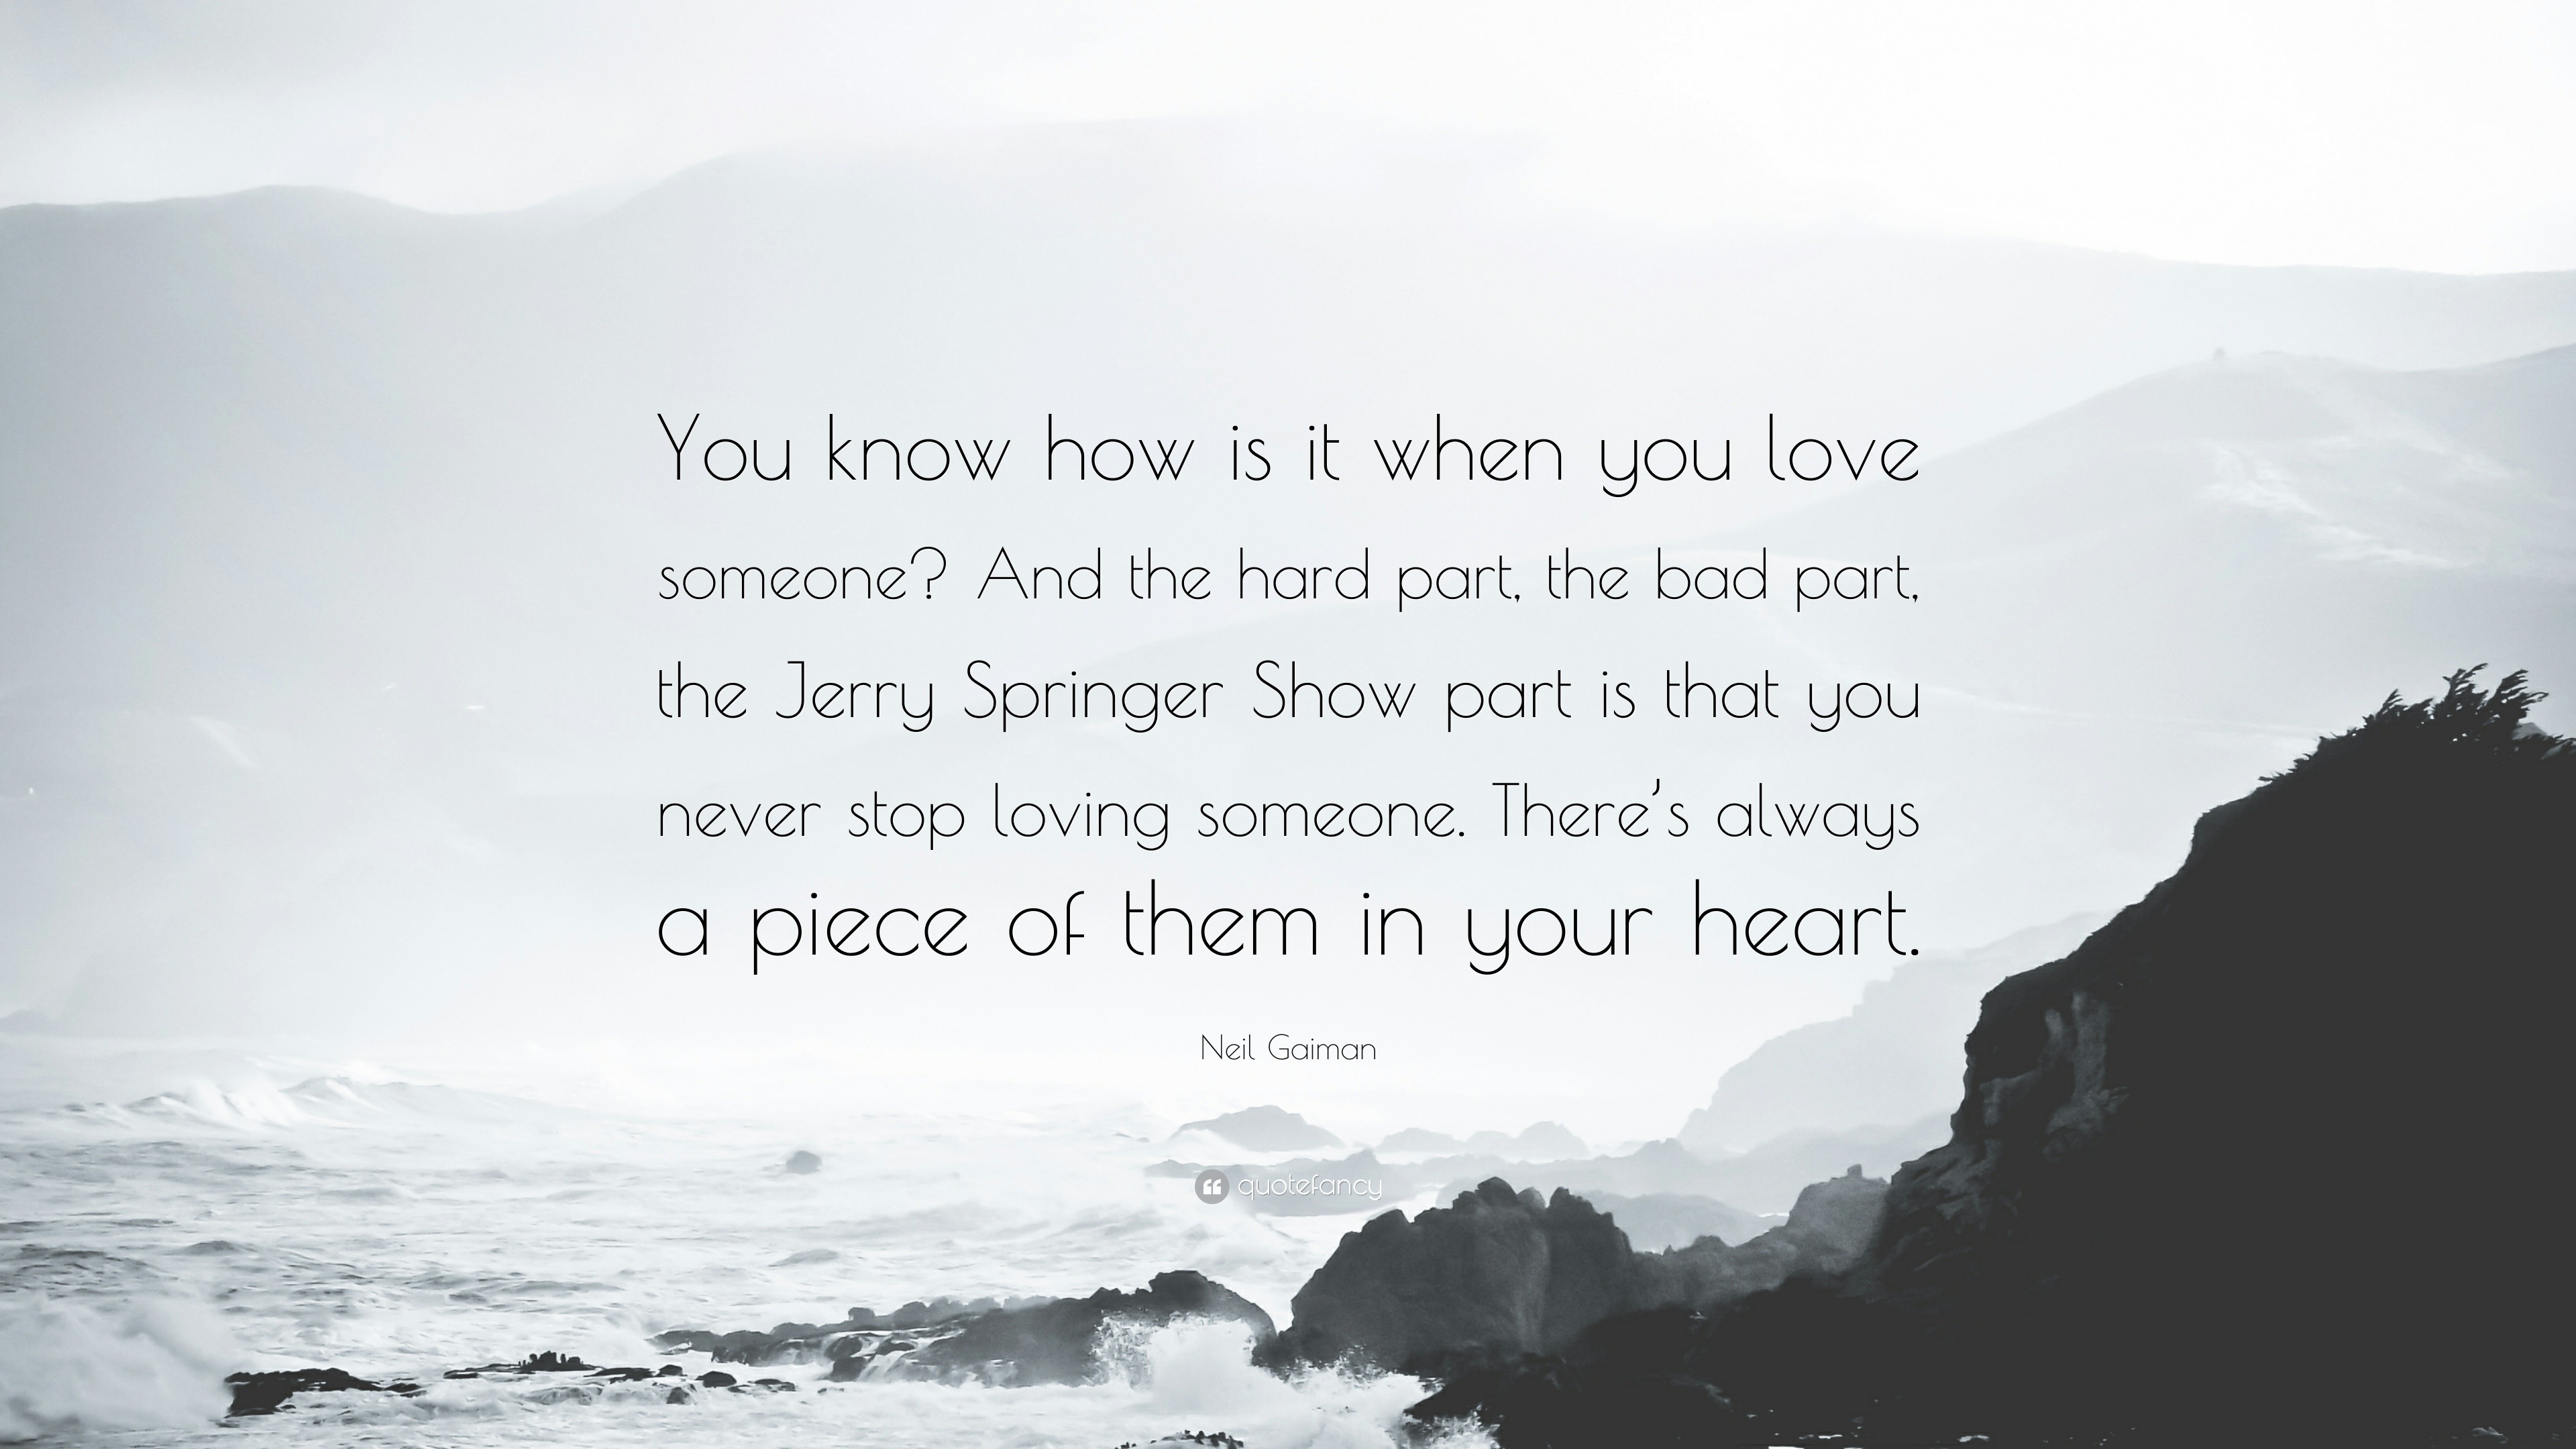 Neil Gaiman Quote “You know how is it when you love someone And